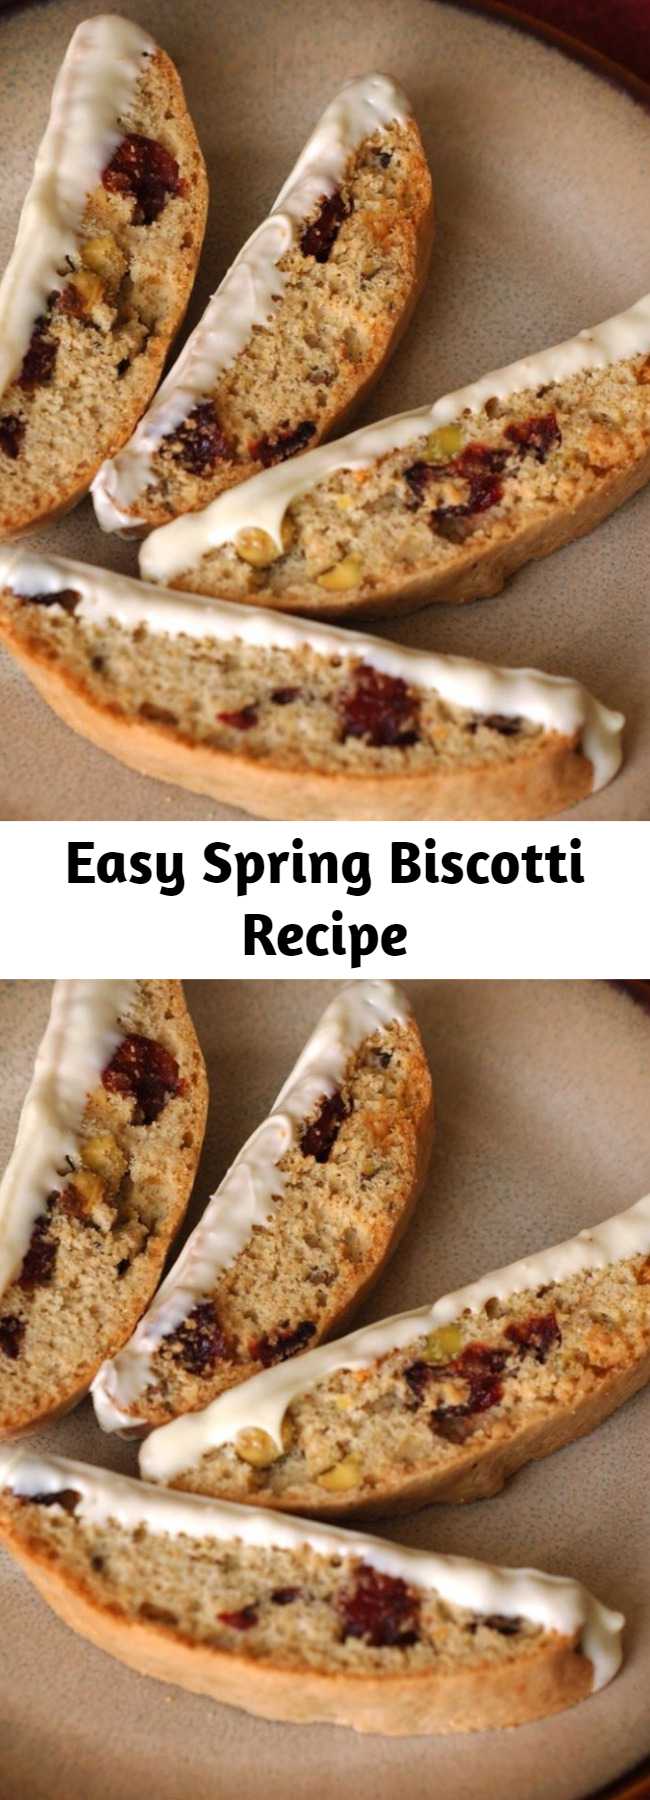 Easy Spring Biscotti Recipe - Fresh tasting biscotti with orange zest, dried cranberries, white chocolate, and pistachios. Very light and tasty.